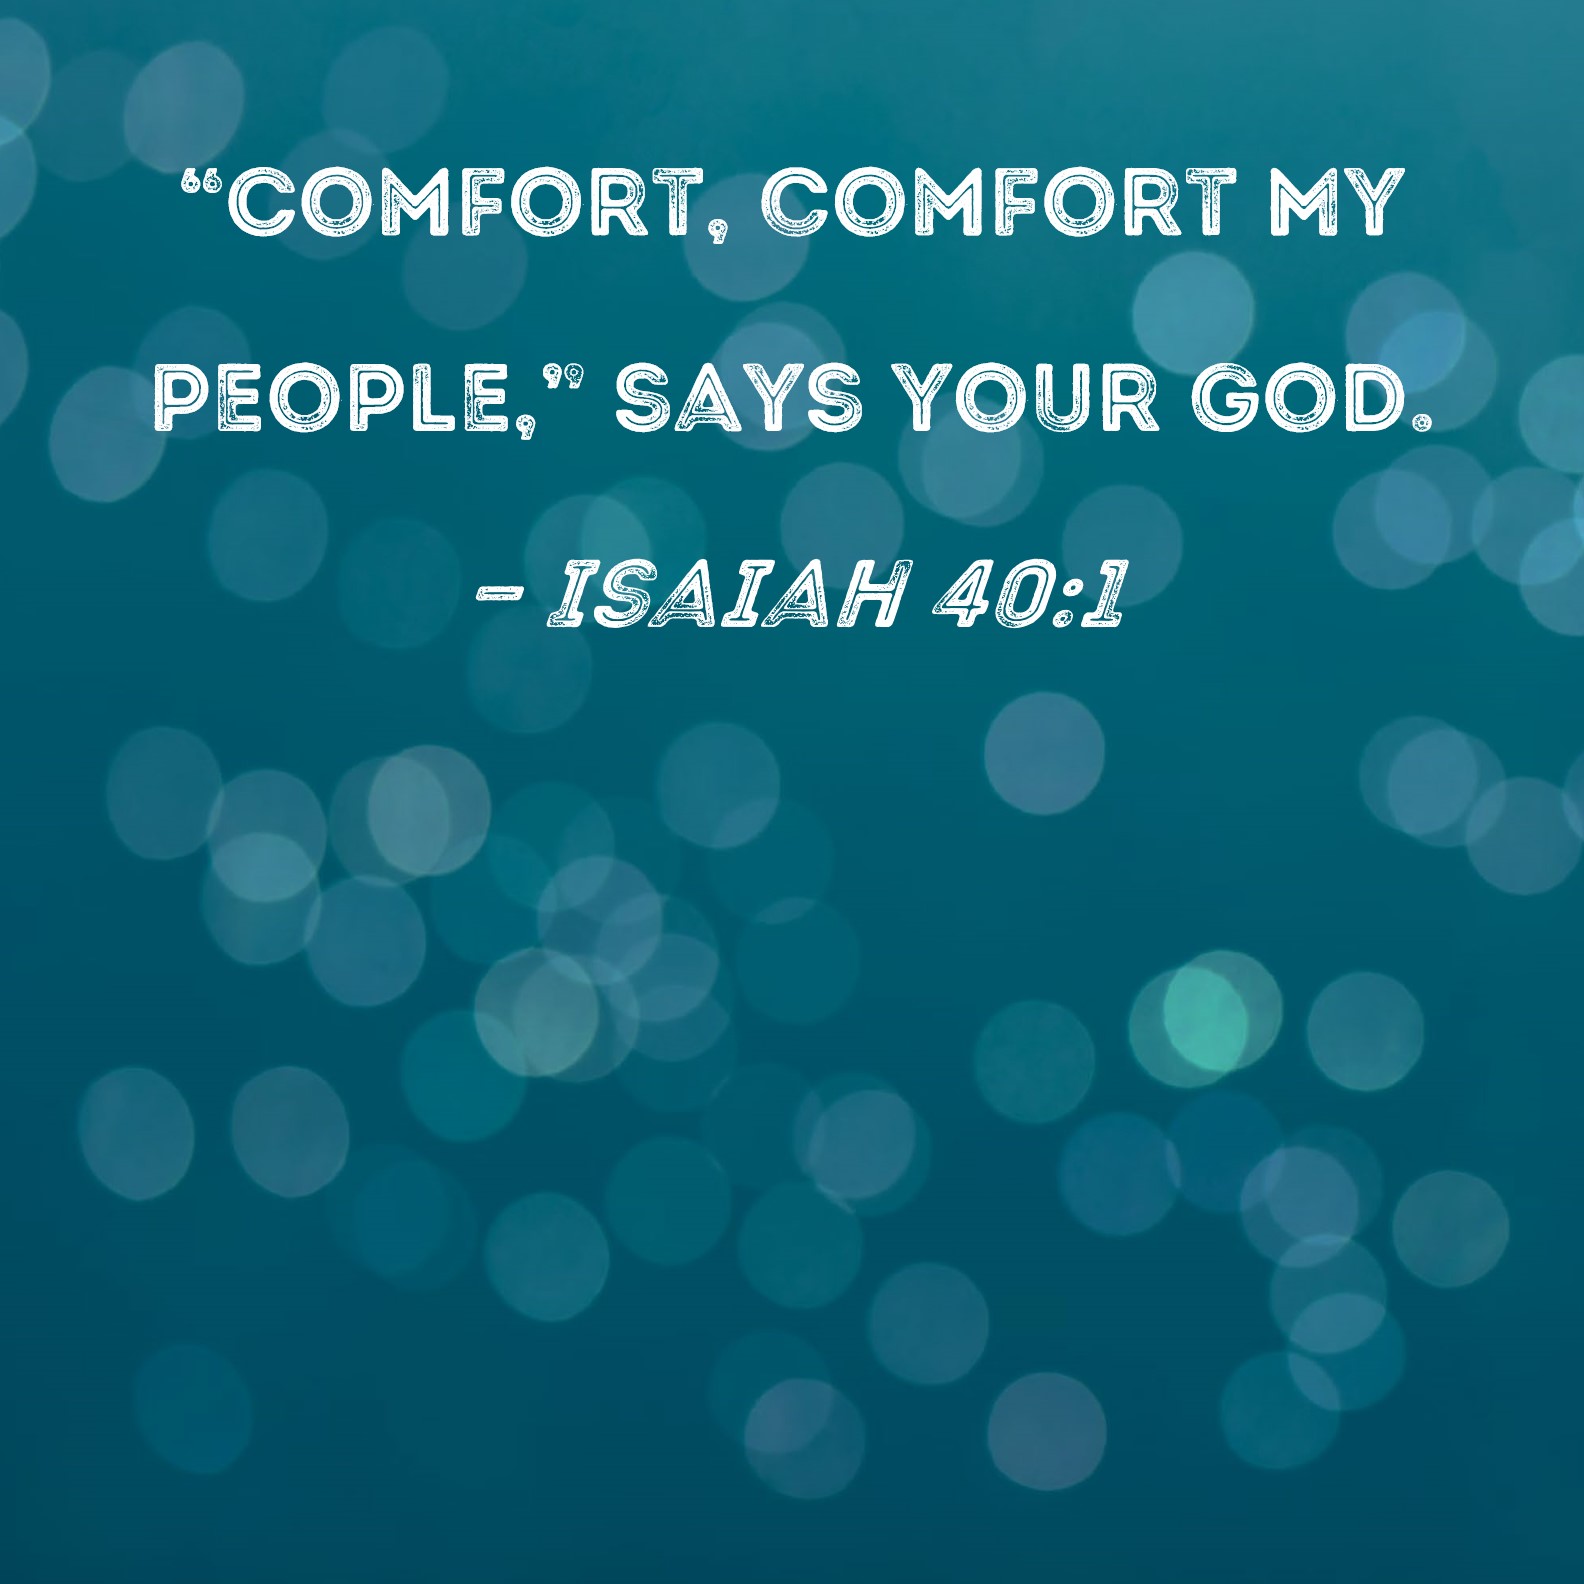 isaiah-40-1-comfort-comfort-my-people-says-your-god